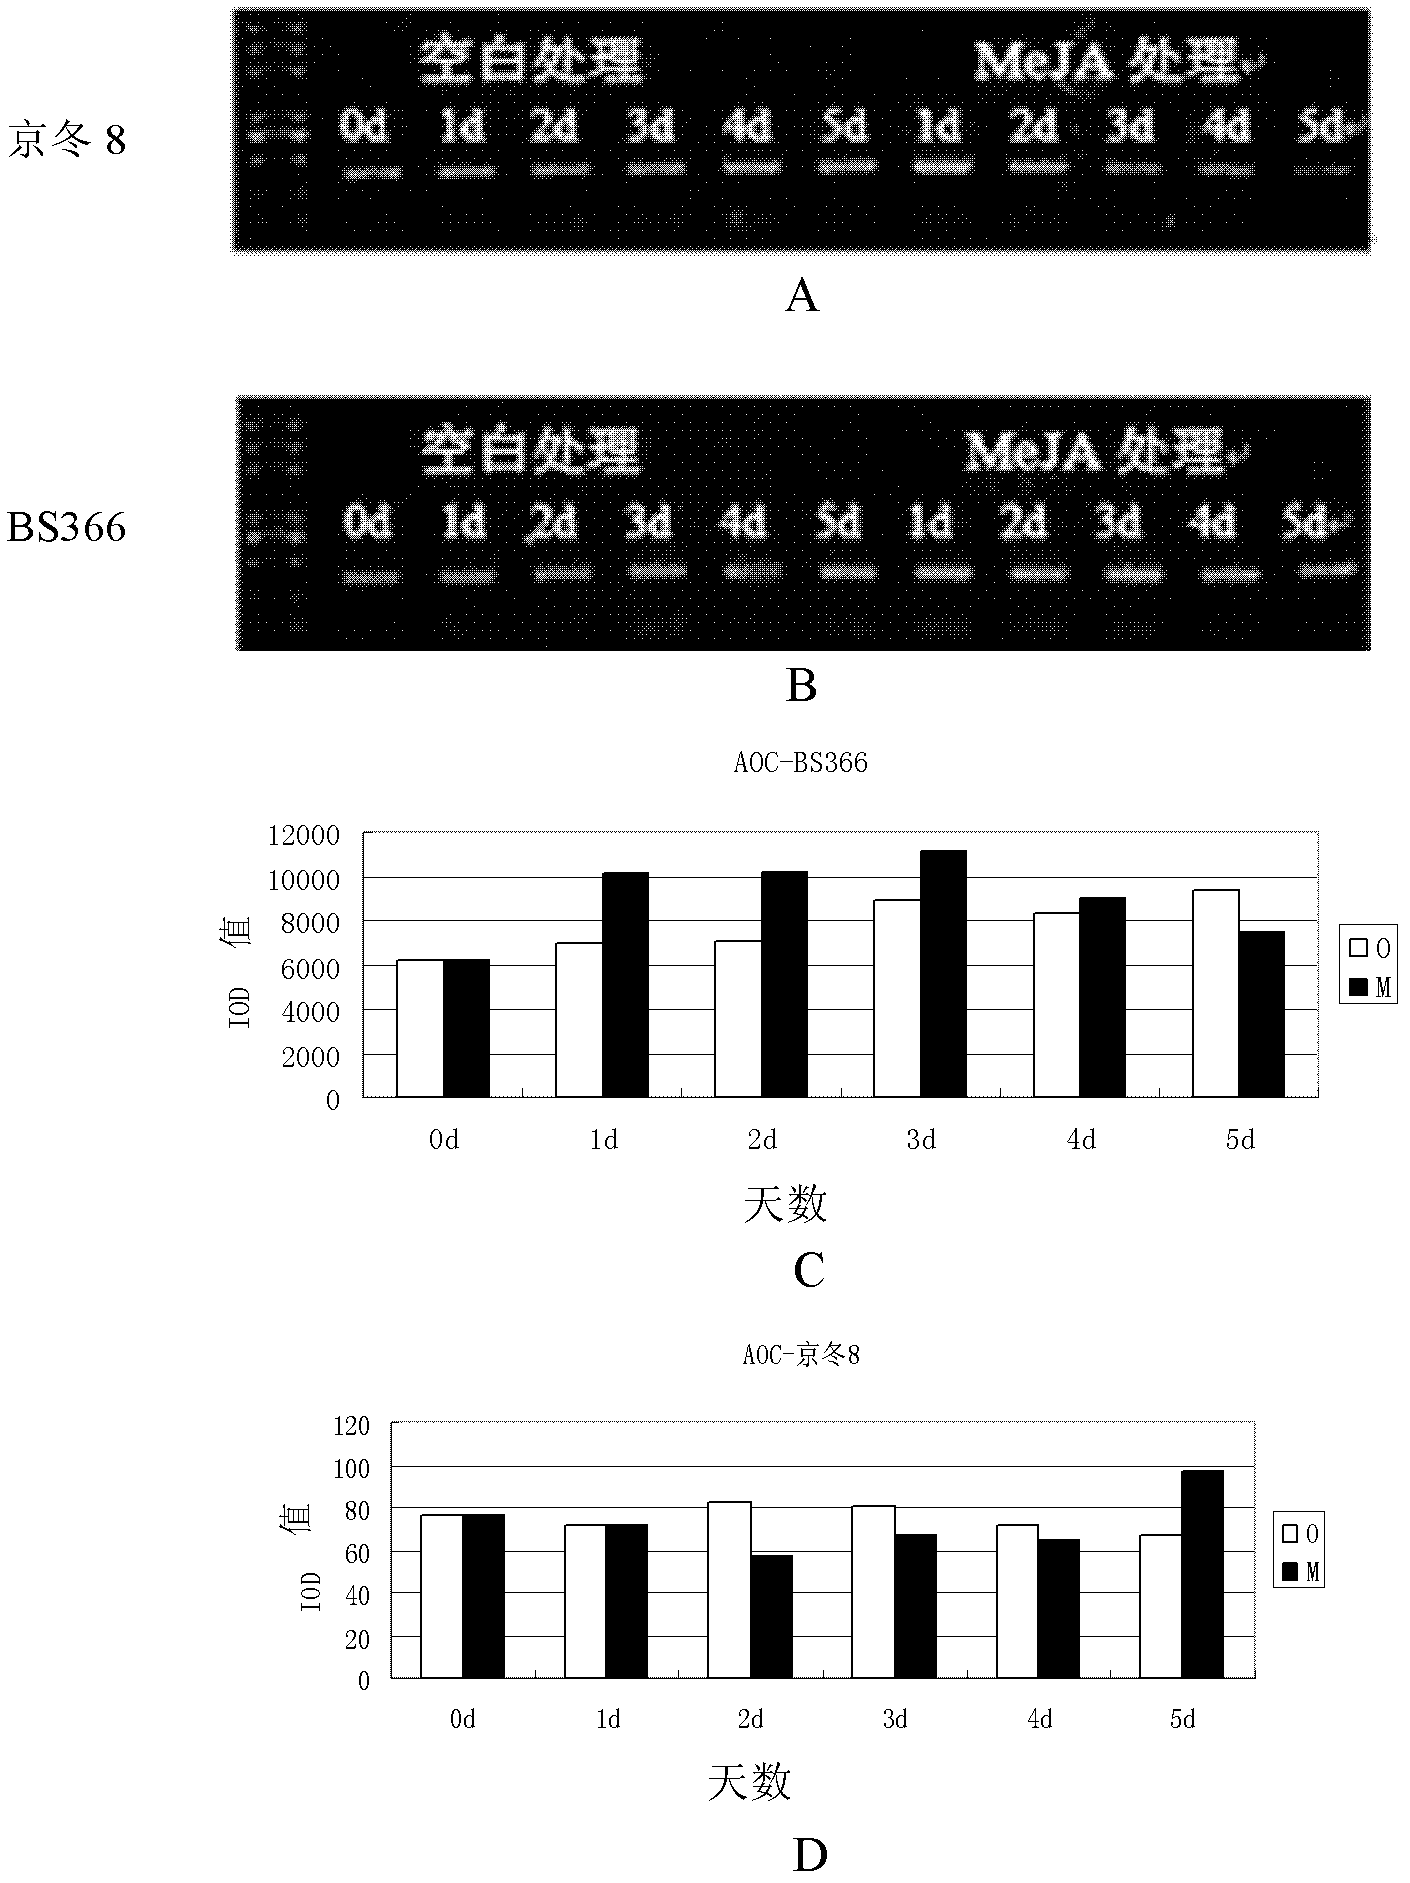 Relevant protein TaAOC for regulating and controlling cracking of plant anther as well as gene and application thereof